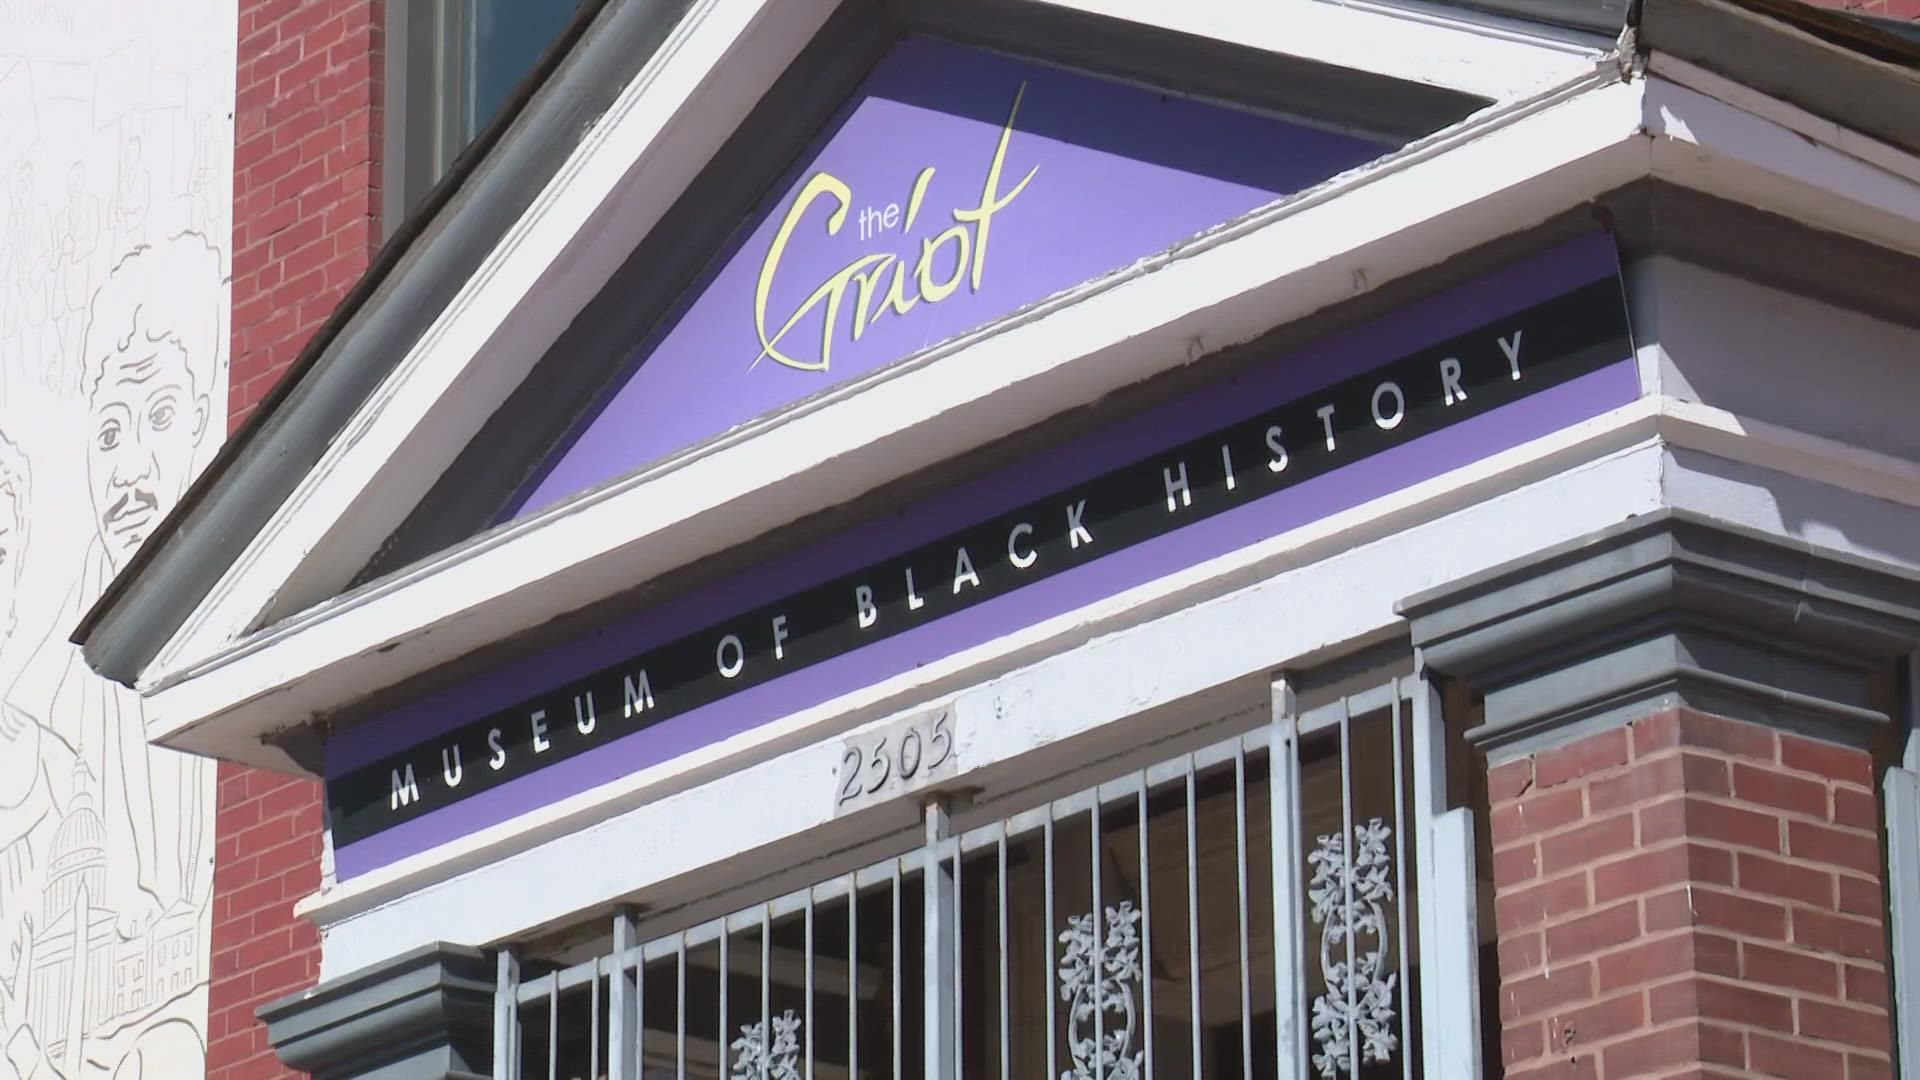 Only the second of its kind in the country, The Griot Museum opened as "The Black World History Wax Museum" in 1997.